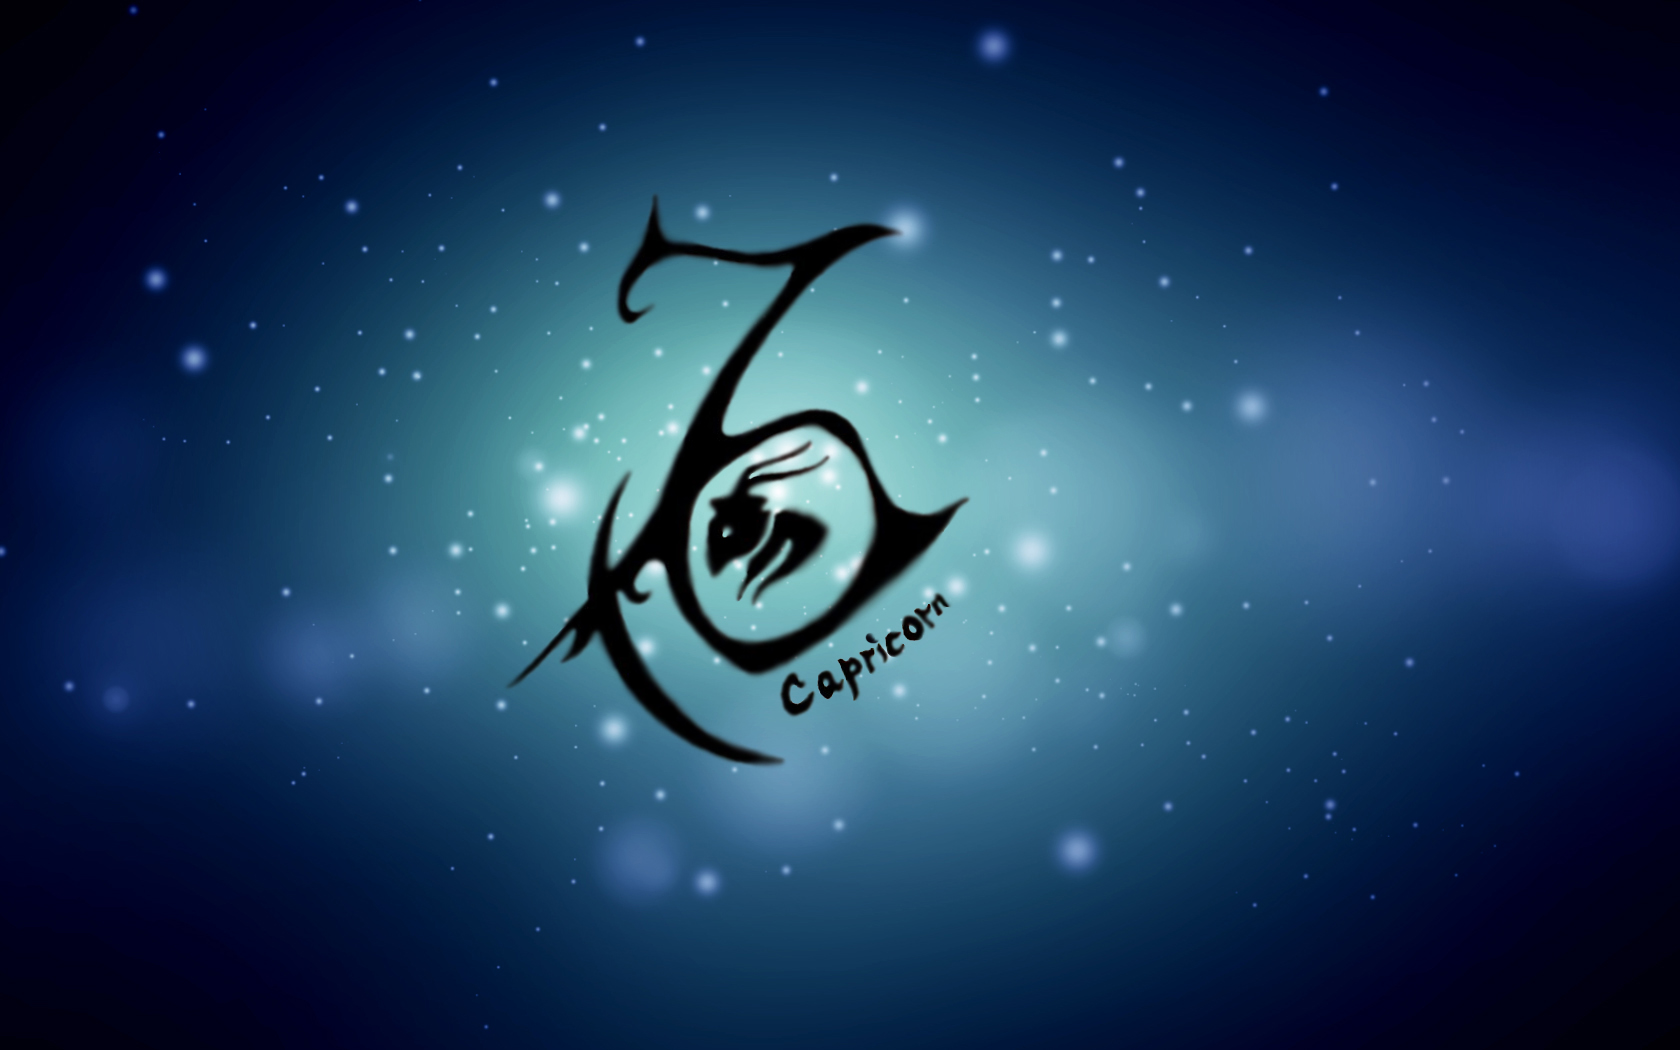 Capricorn Horoscope Wallpaper HD Pictures One